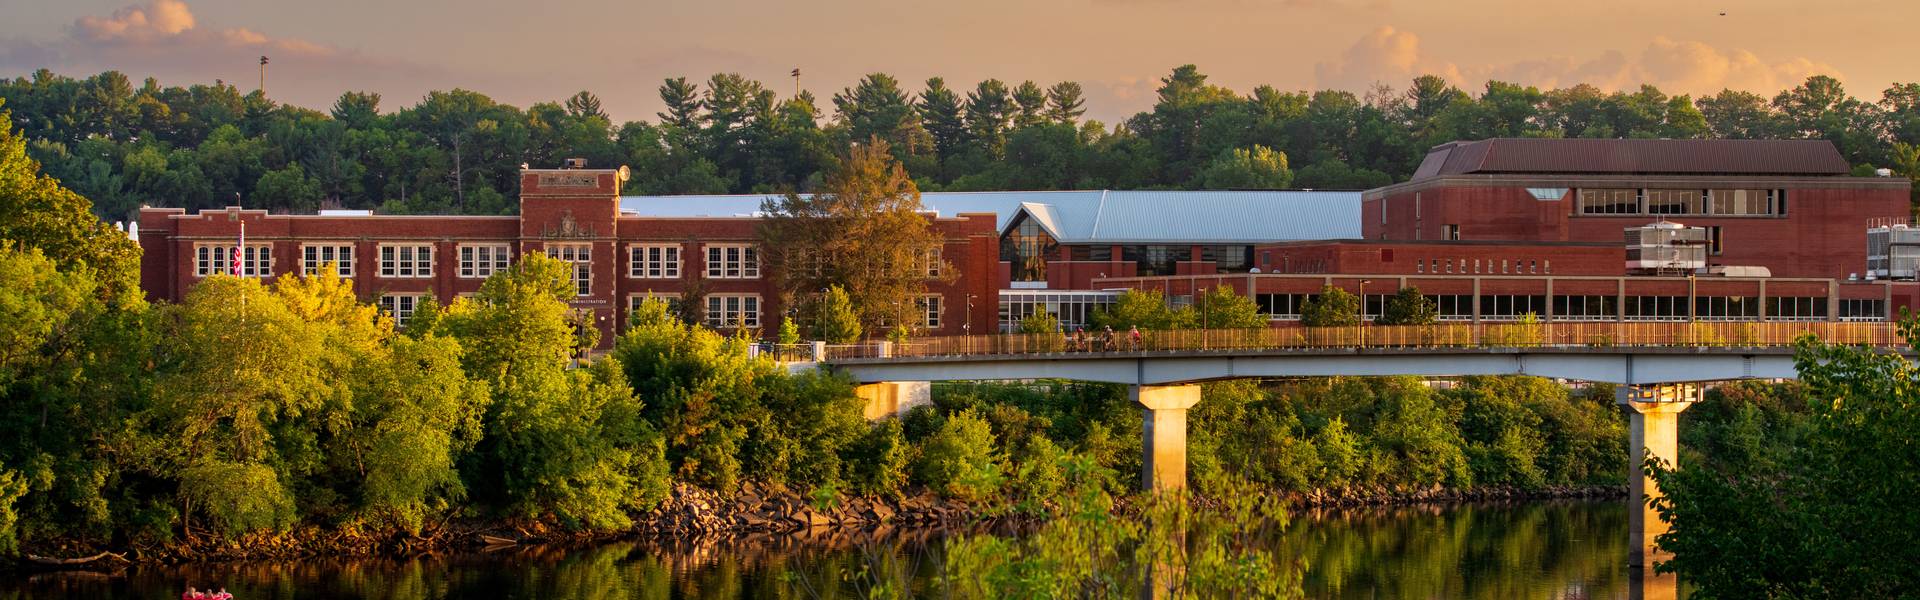 A view of Schofield Hall, a brick building, across the river with the sun setting in vibrant colors